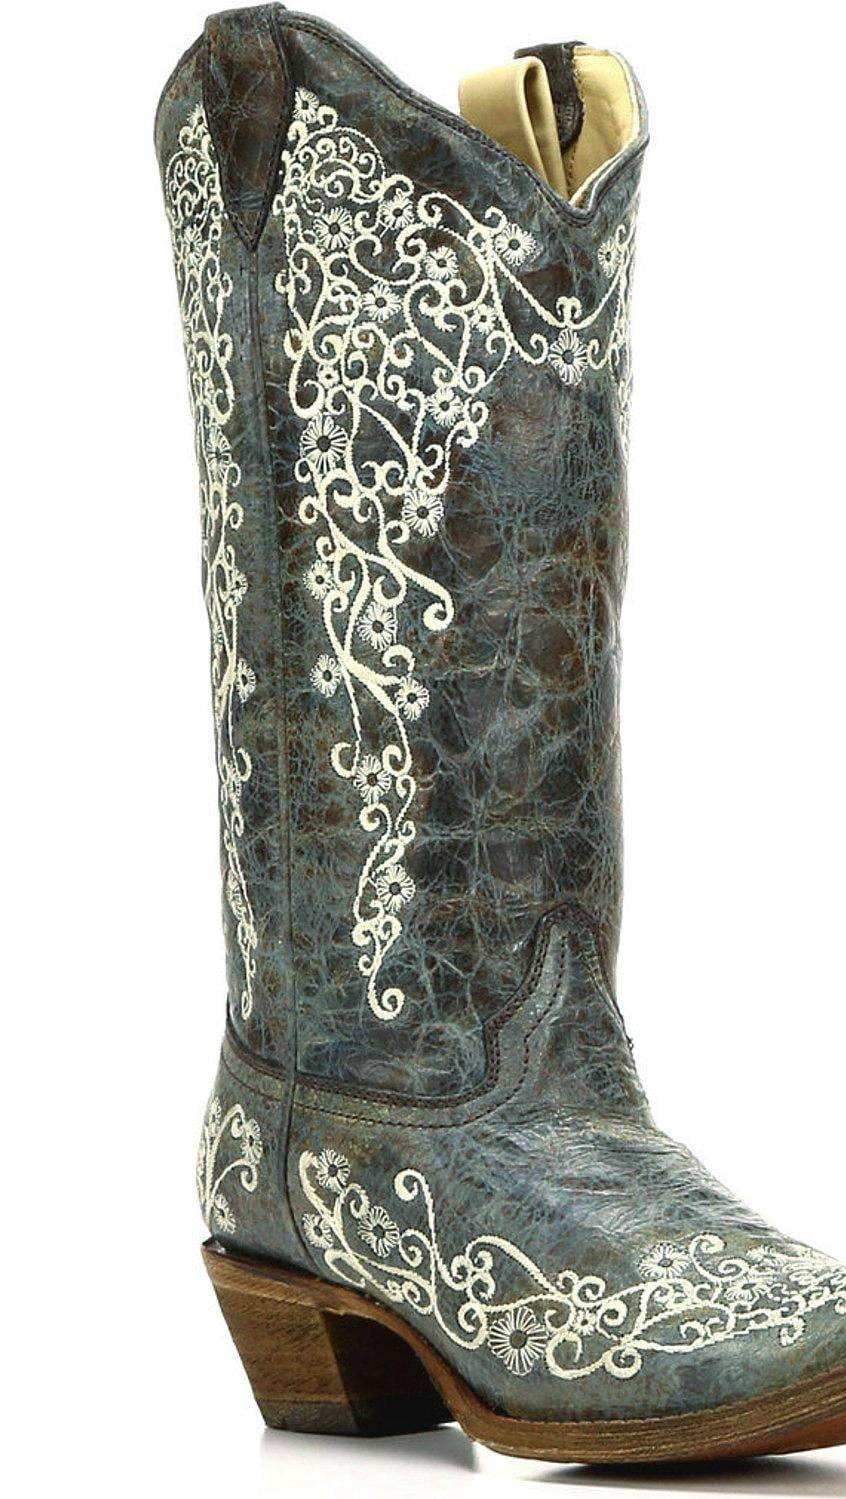 Corral Womens 12-inch Brown Turquoise/Beige Embroidery Snip Toe Pull-On Cowboy Boots 